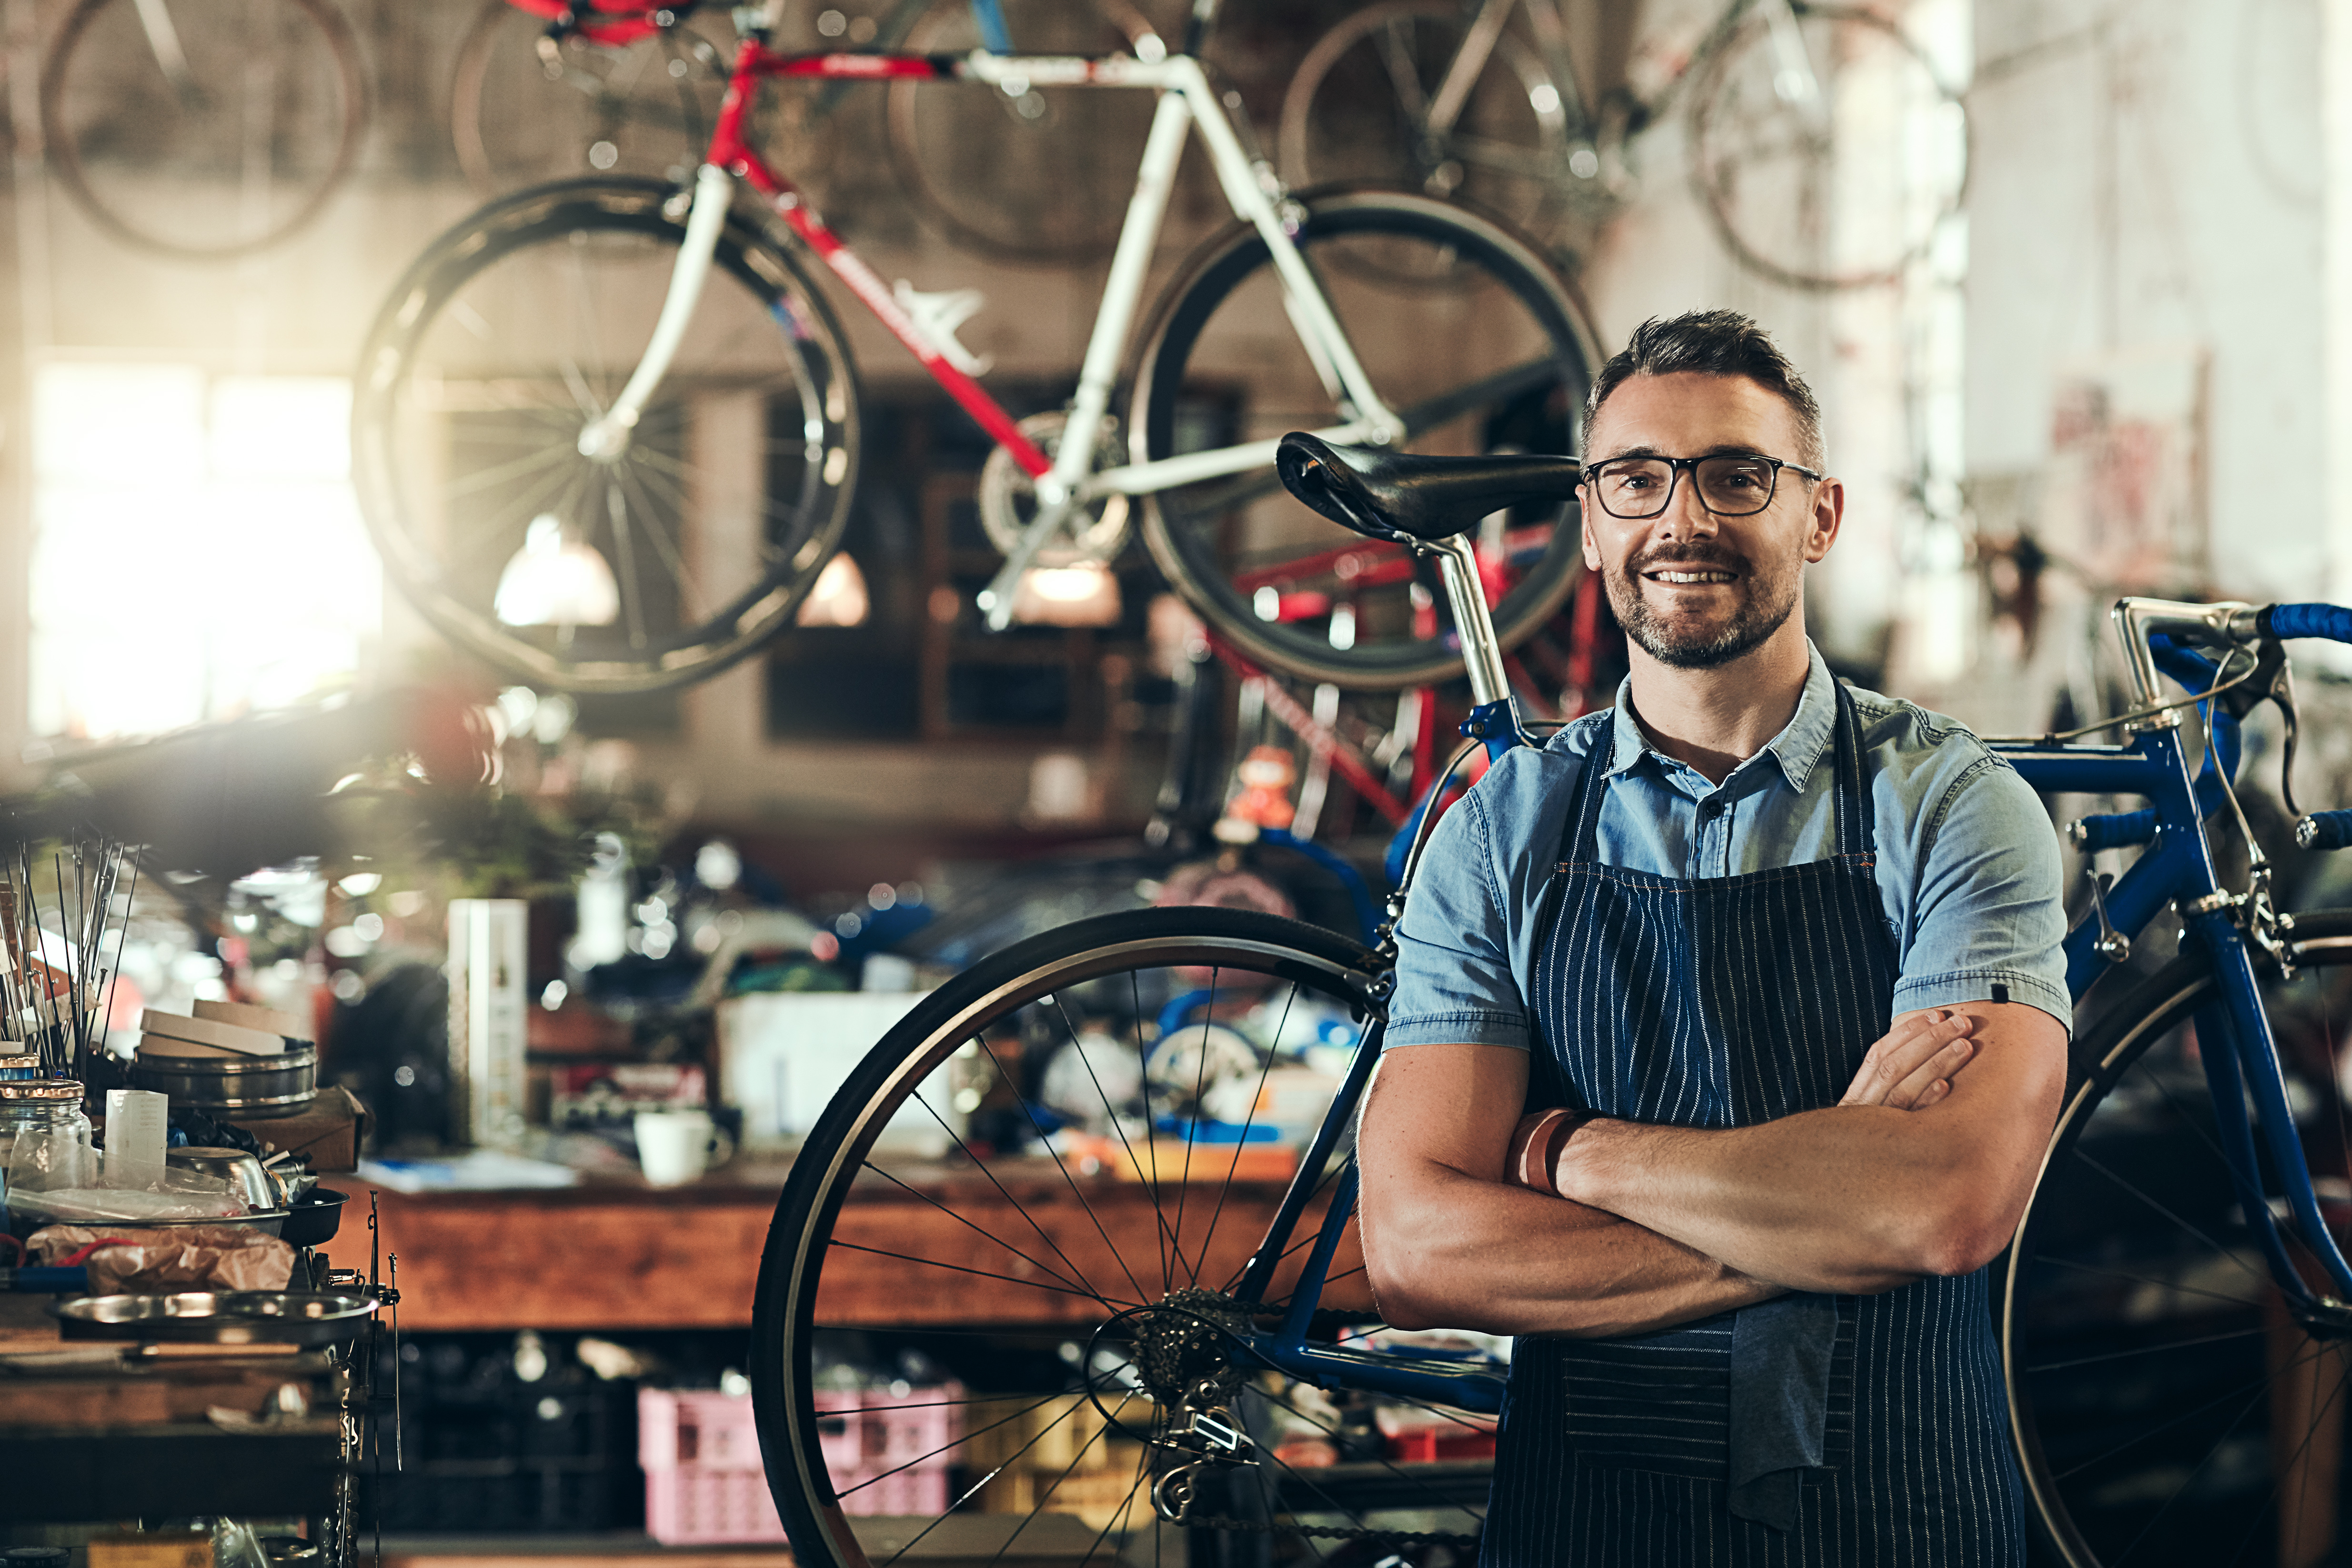 Portrait of a mature man working in a bicycle repair shop